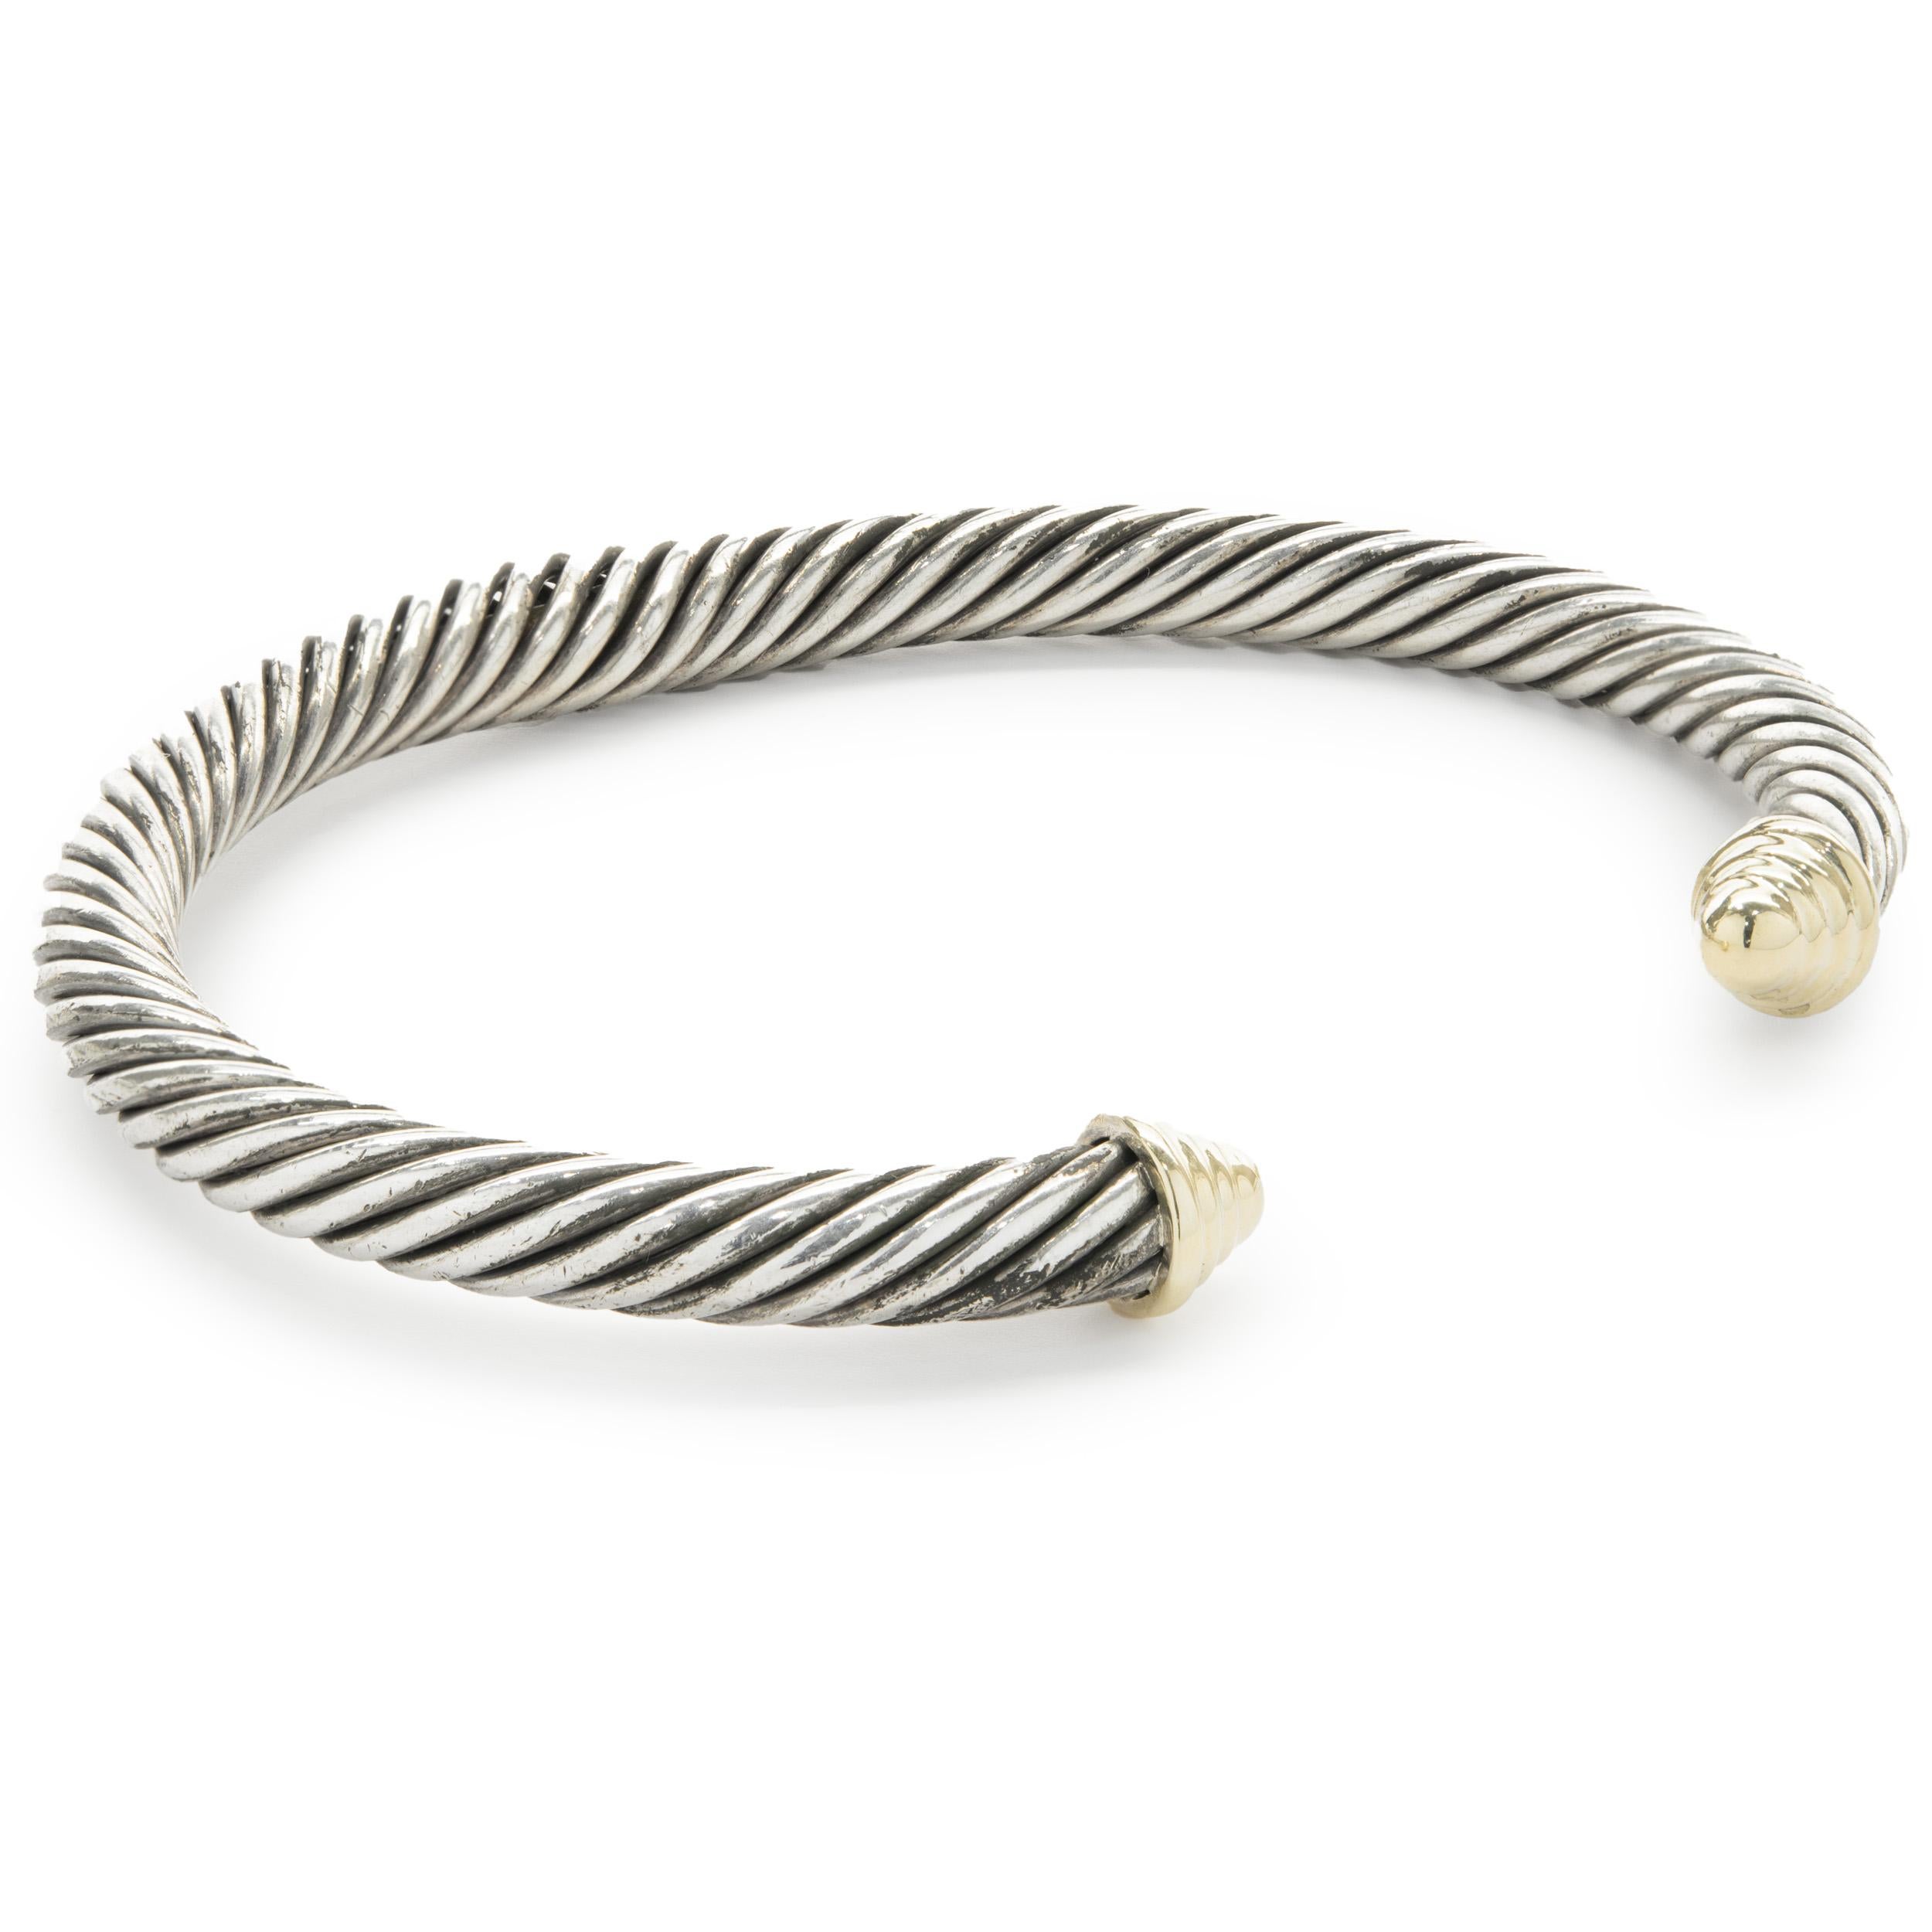 Designer: David Yurman
Material: 14K yellow gold / Sterling Silver
Dimensions: bracelet will fit up to a 6.5-inch wrist
Weight: 27.46 grams